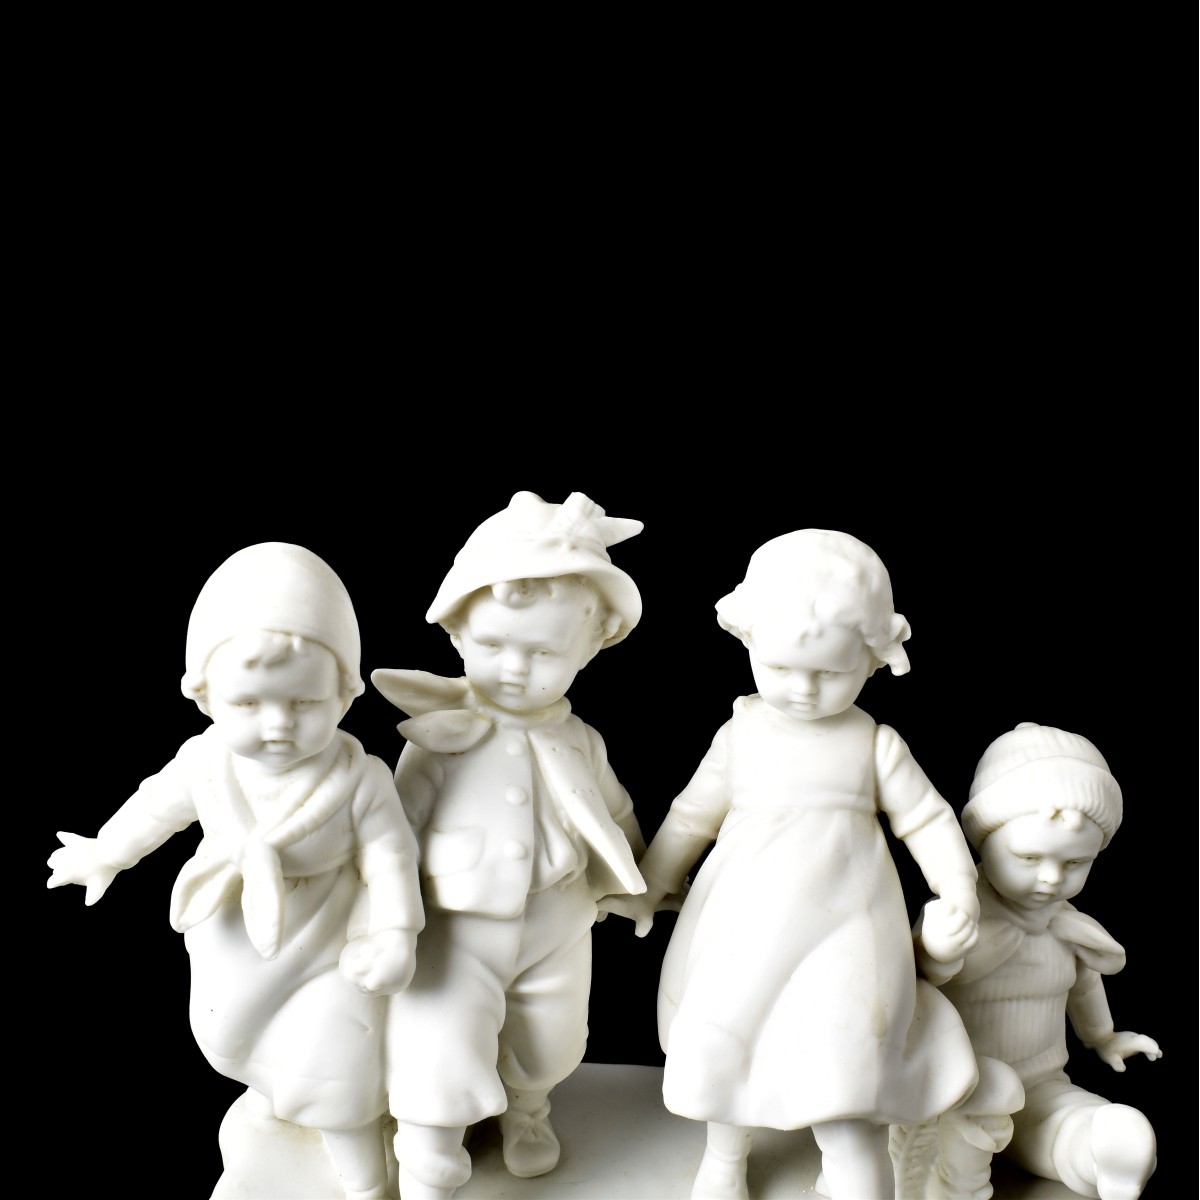 European Bisque "Playing in the Snow" Figurine